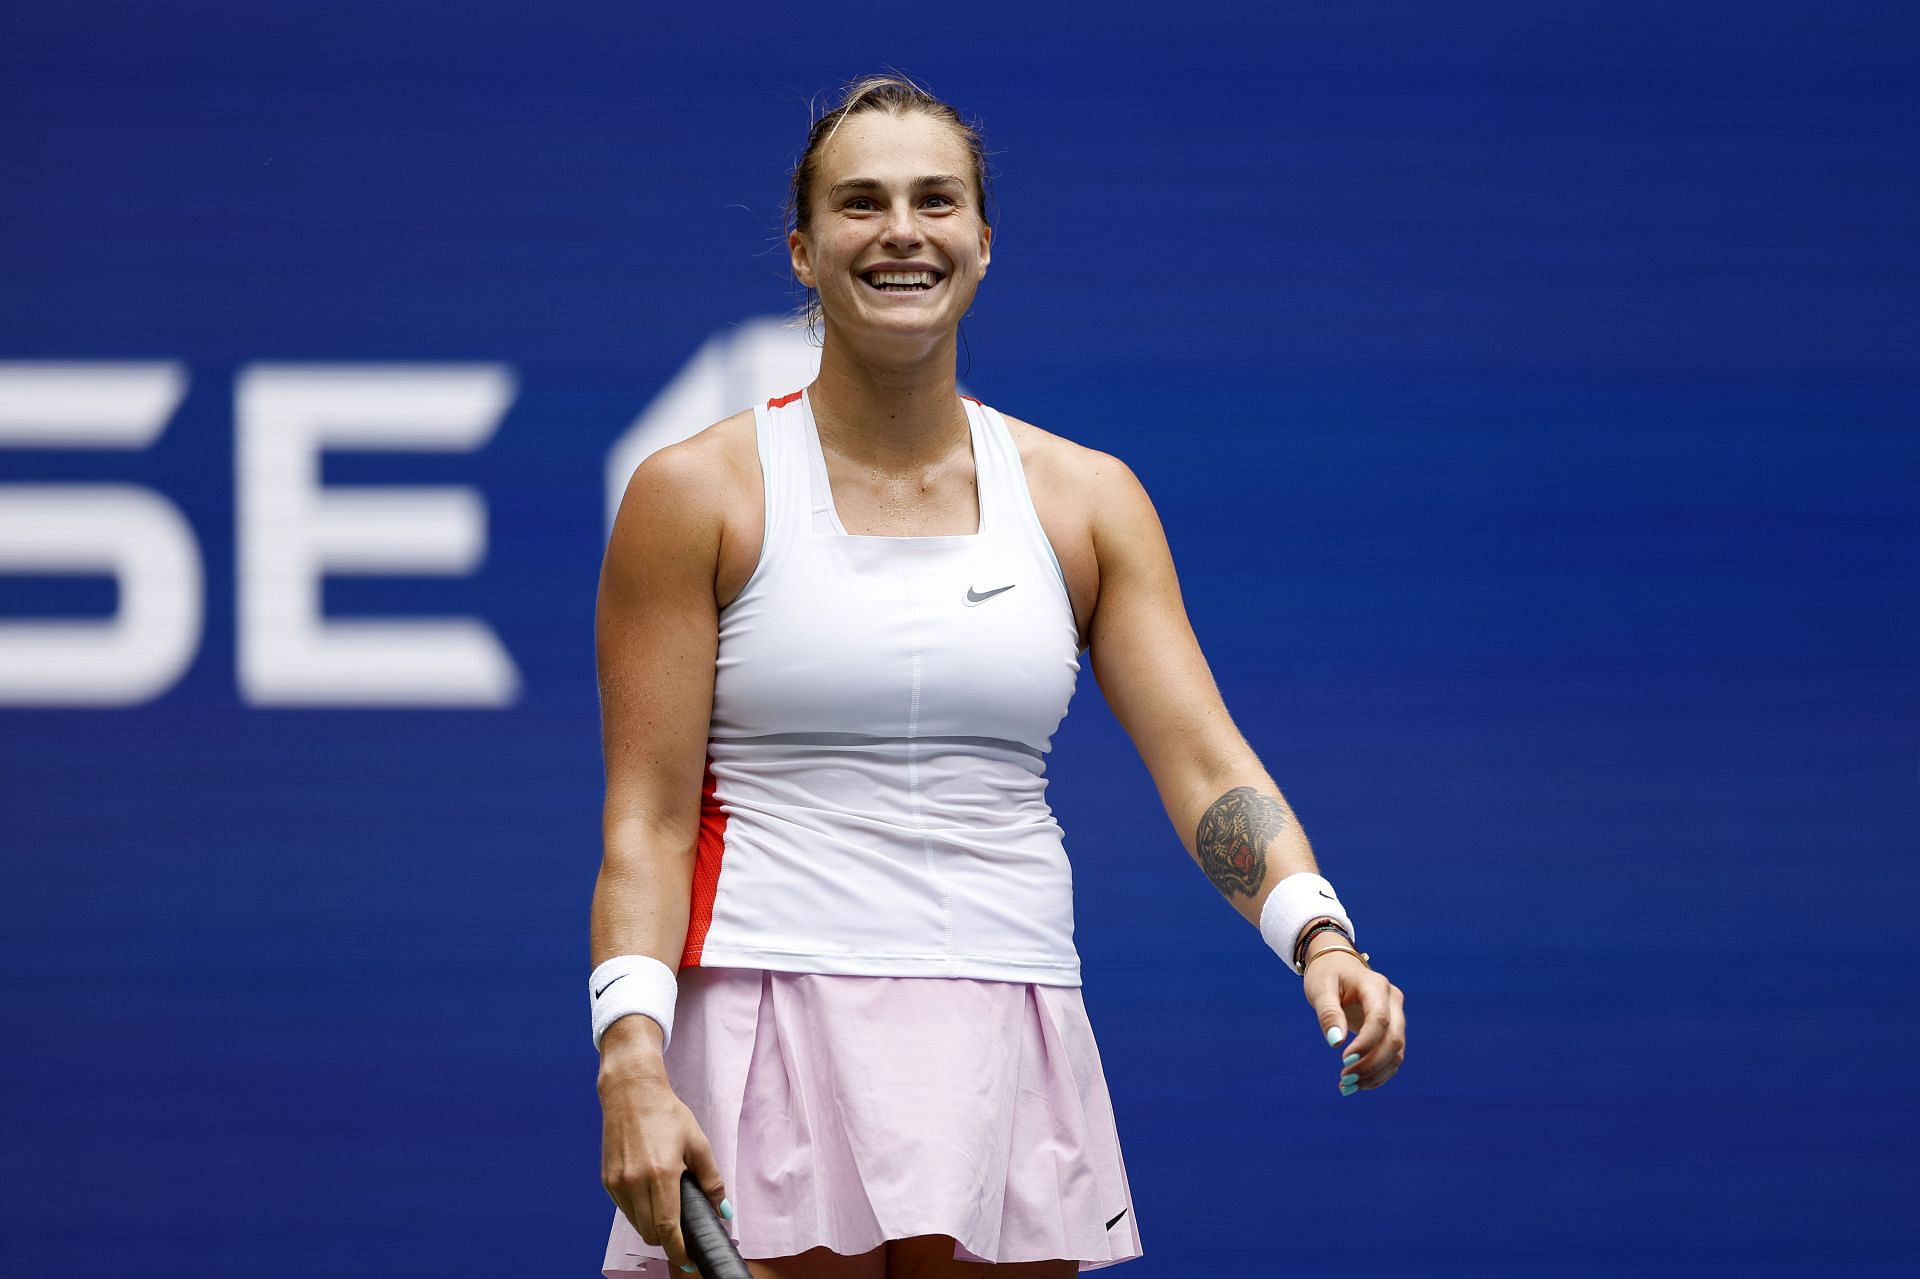 Aryna Sabalenka is the second seed at the Adelaide International 1.